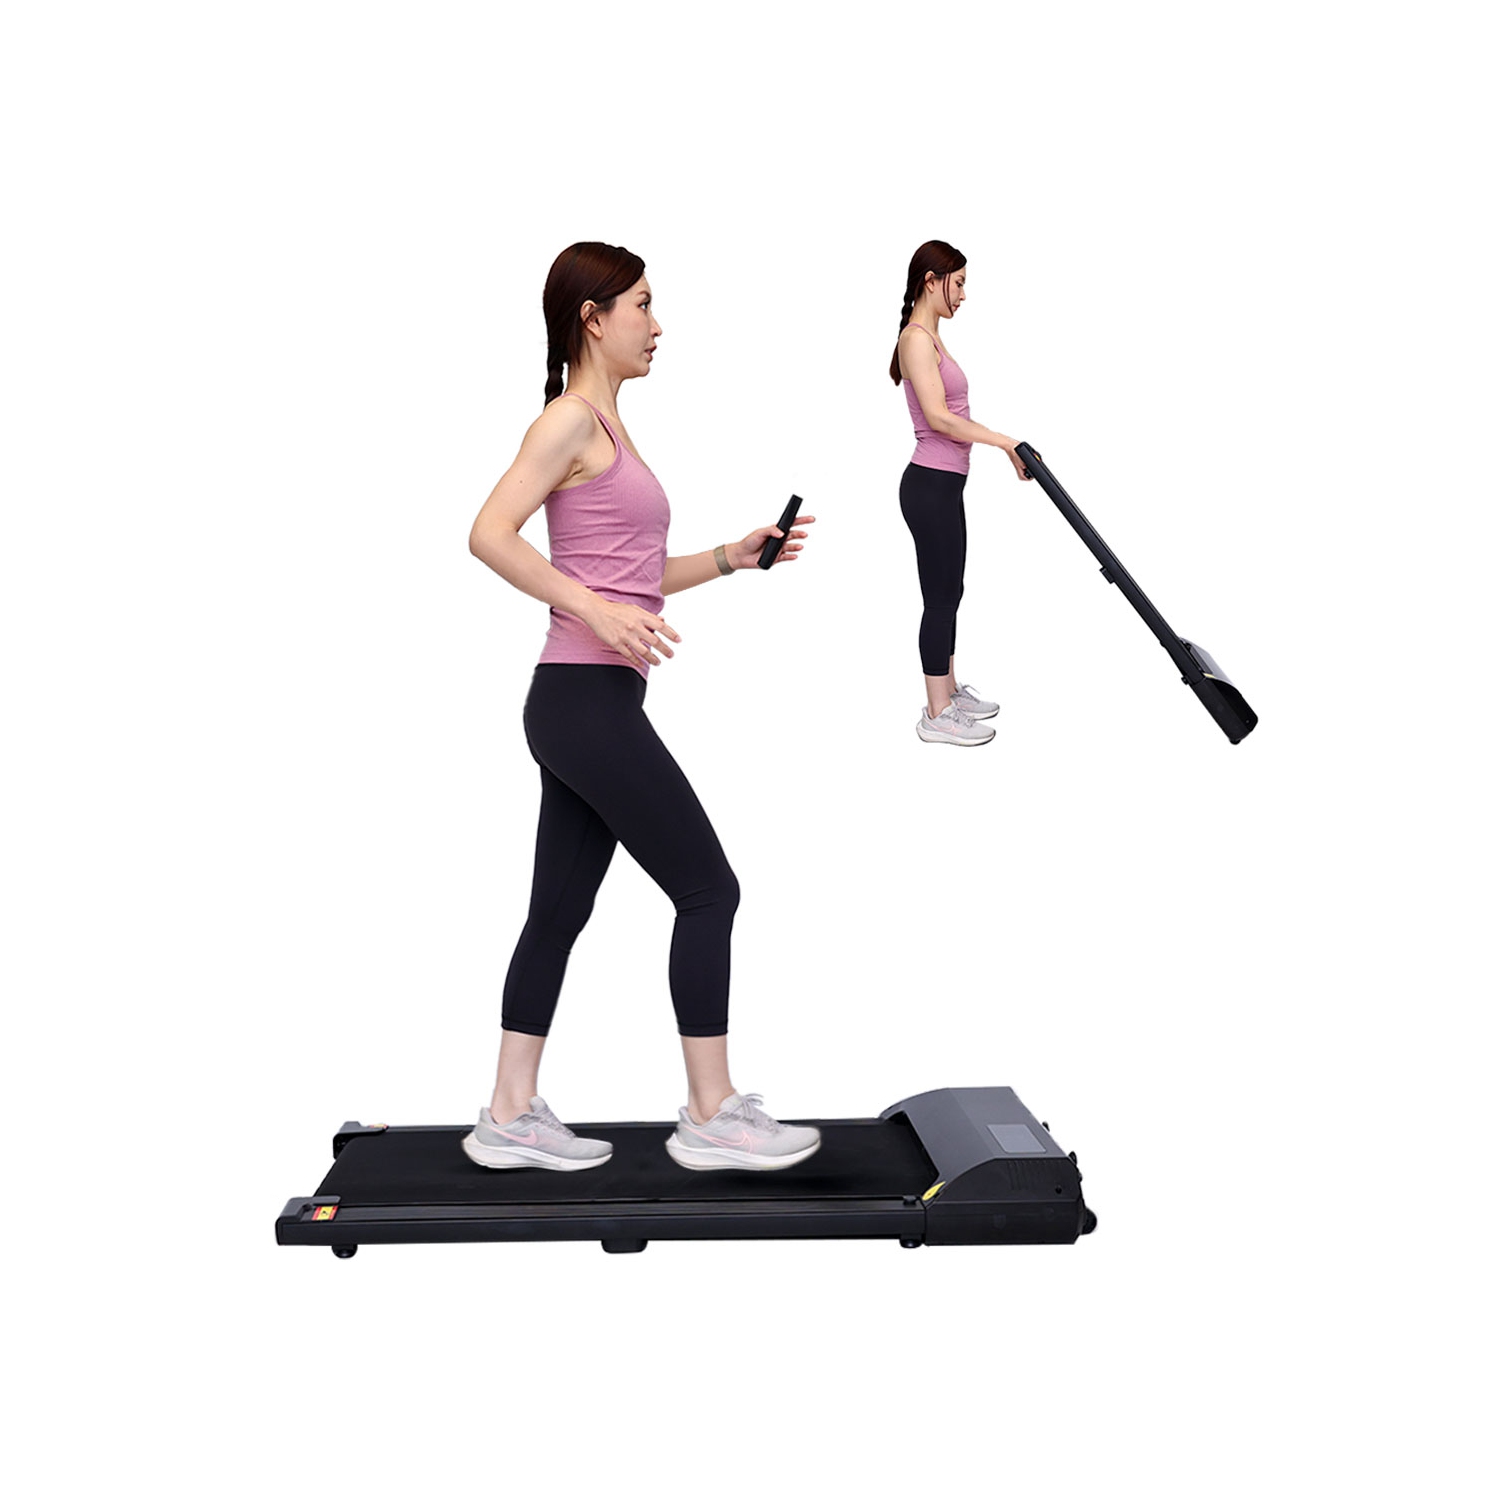 MotionGrey Walking Pad Treadmill - Slim Portable Under Desk Training Electric Fitness Pad for Cardio Workout in Home and Office